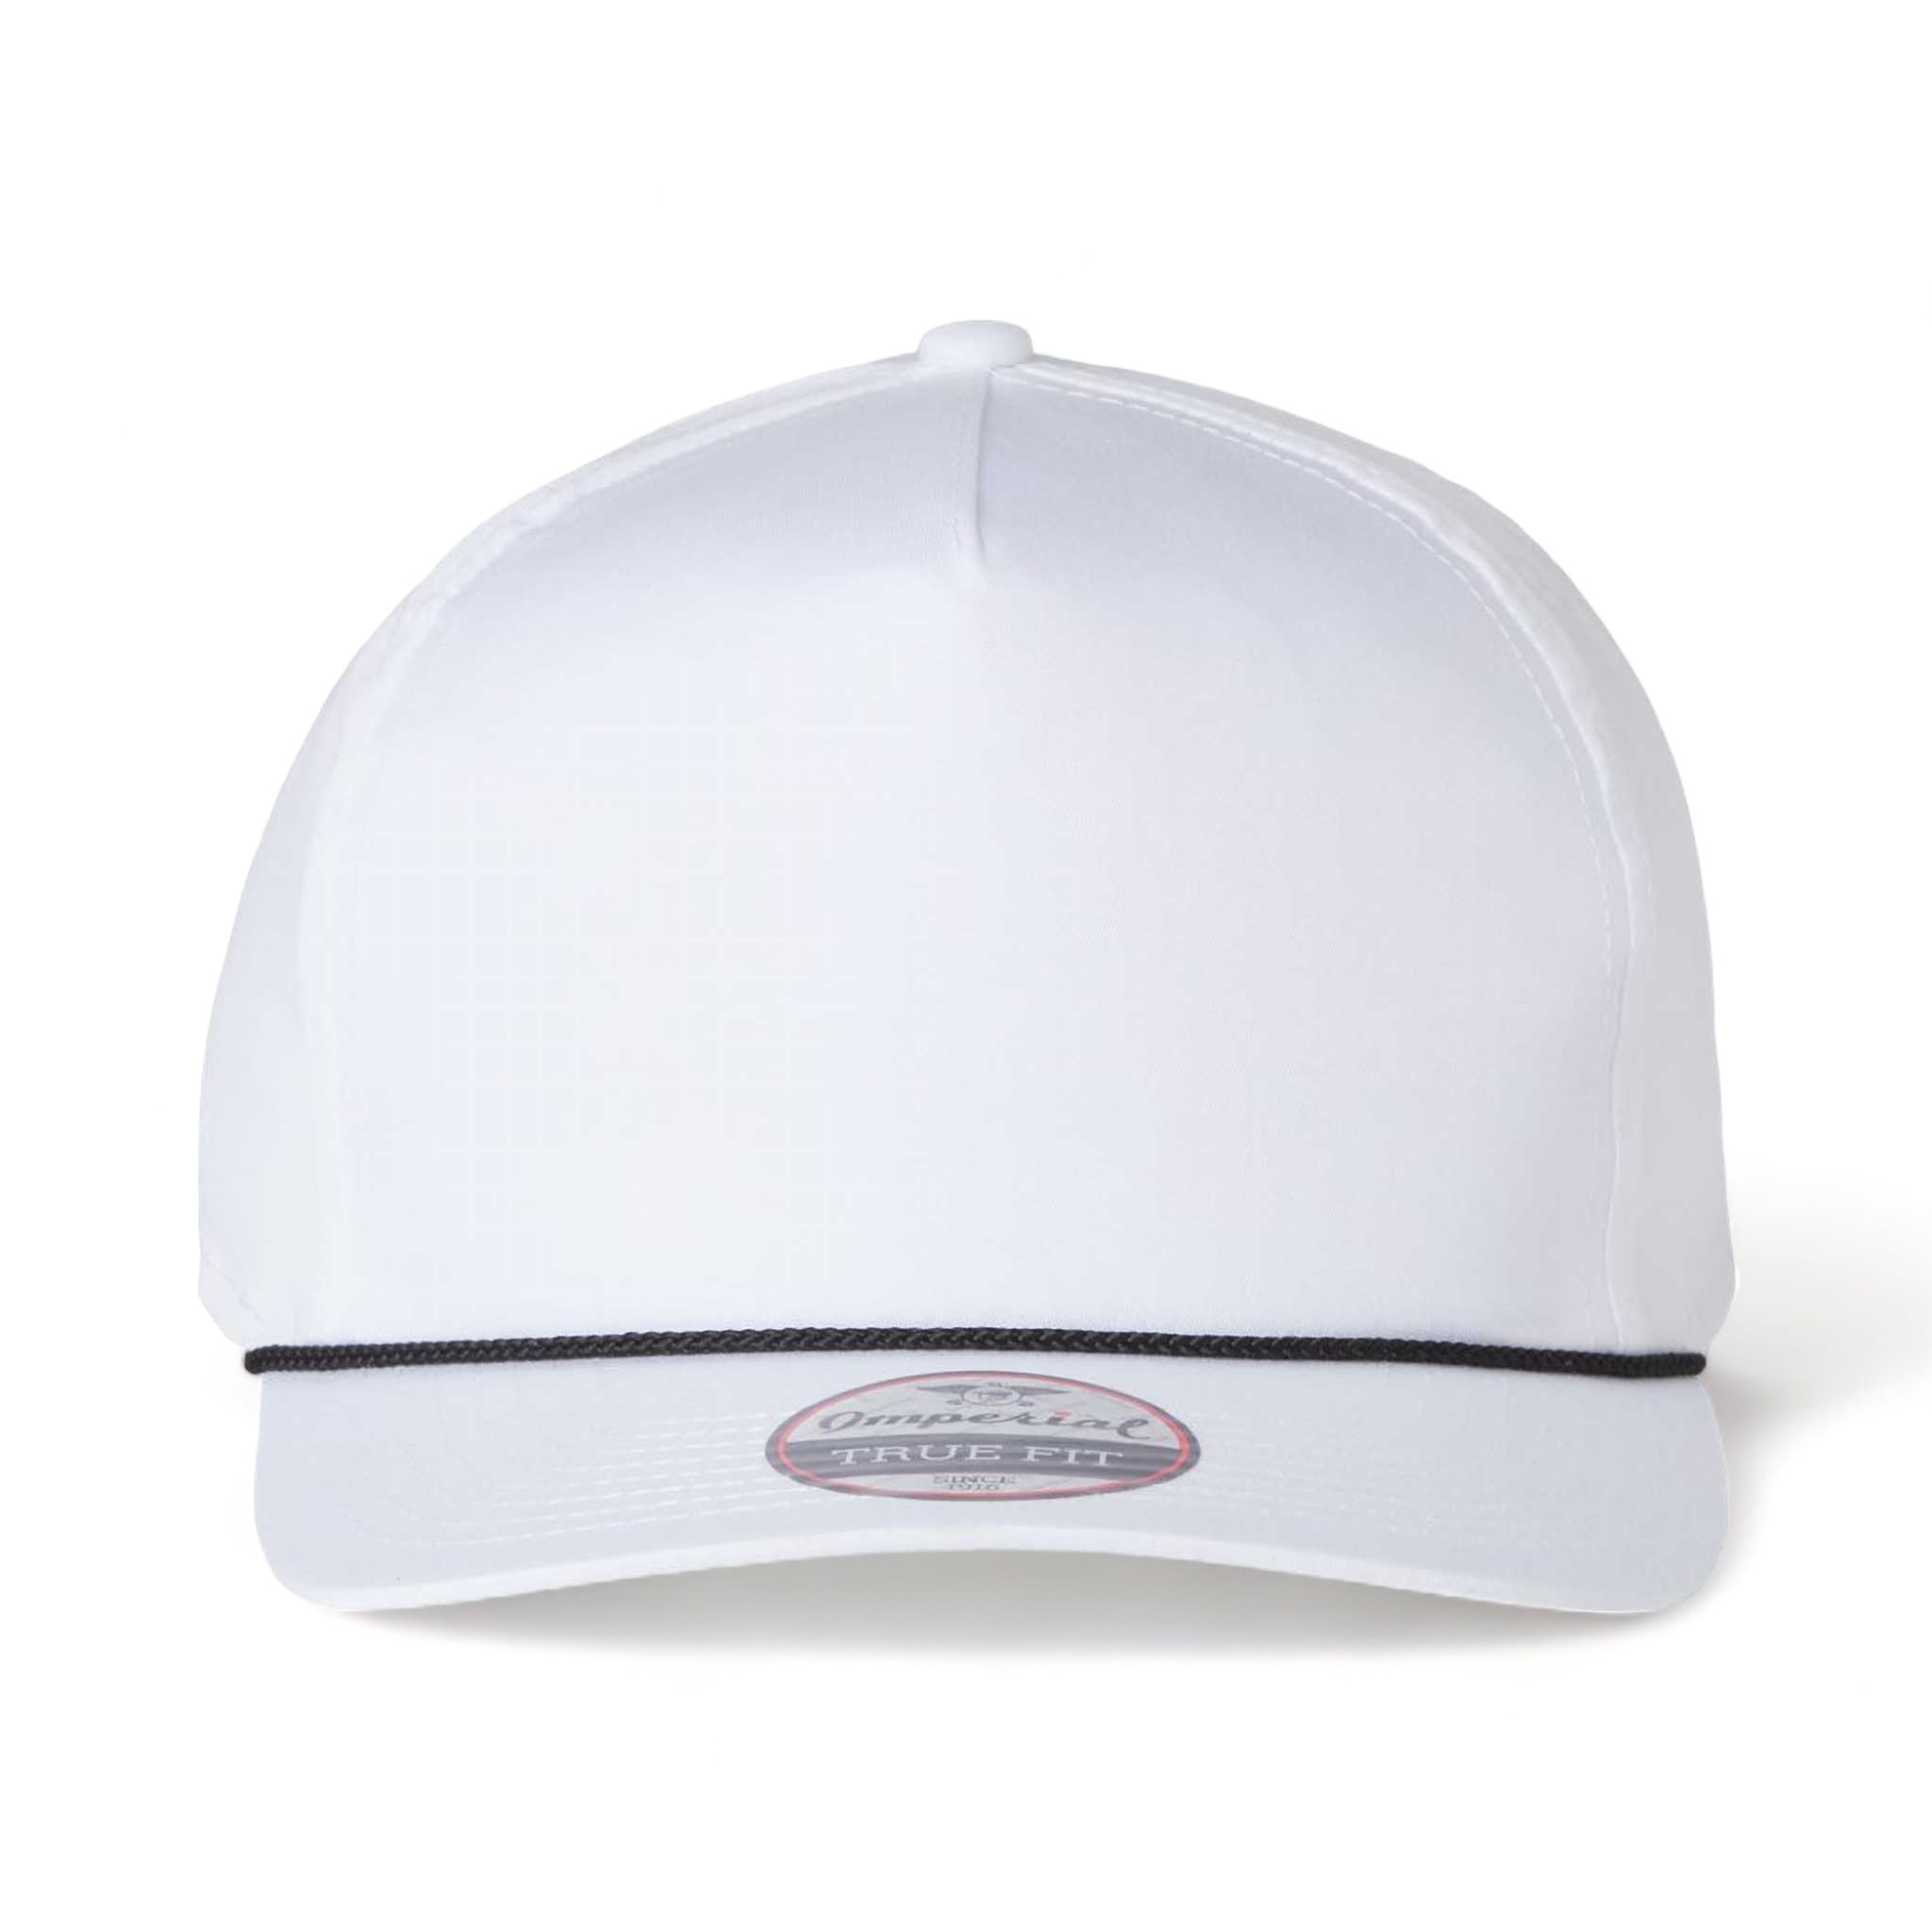 Front view of Imperial 5056 custom hat in white and black